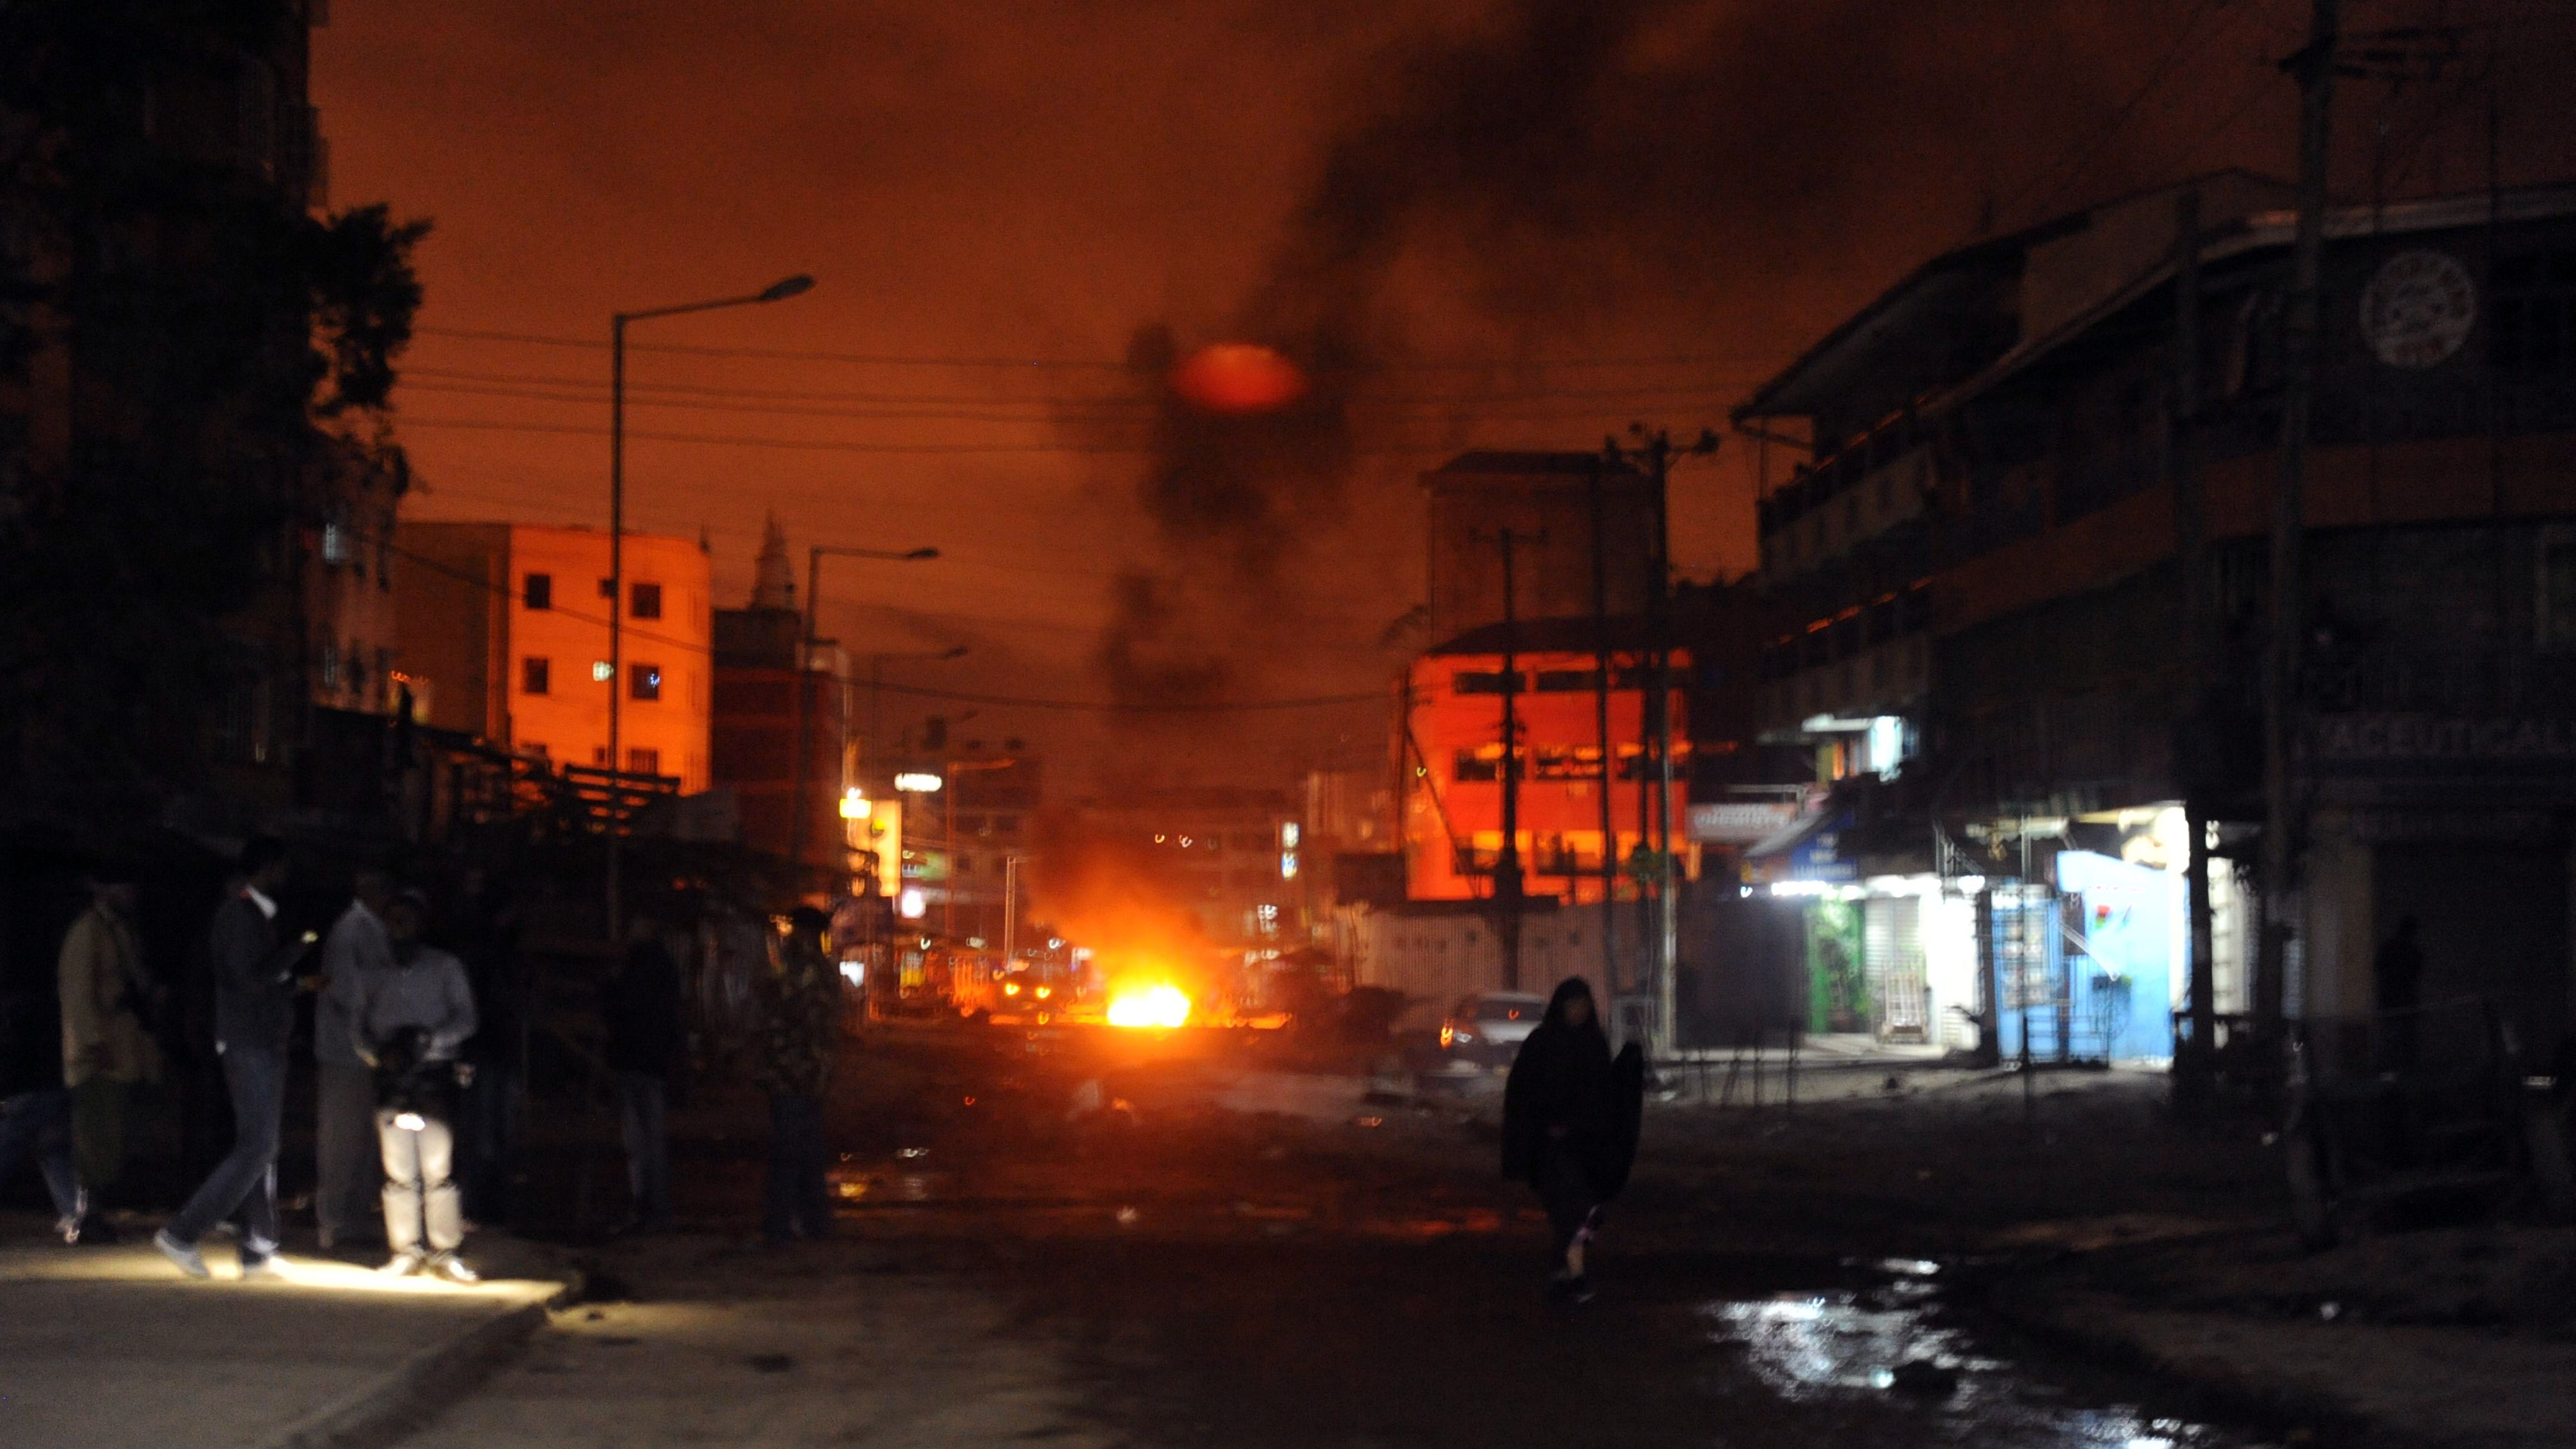 Smoke billows from a fire in a street, on December 7, 2012, following a large explosion outside a mosque in Nairobi. Three people were killed and eight wounded in the blast, the Kenyan Red Cross and police said. The blast followed one in the same neighborhood earlier in the week.